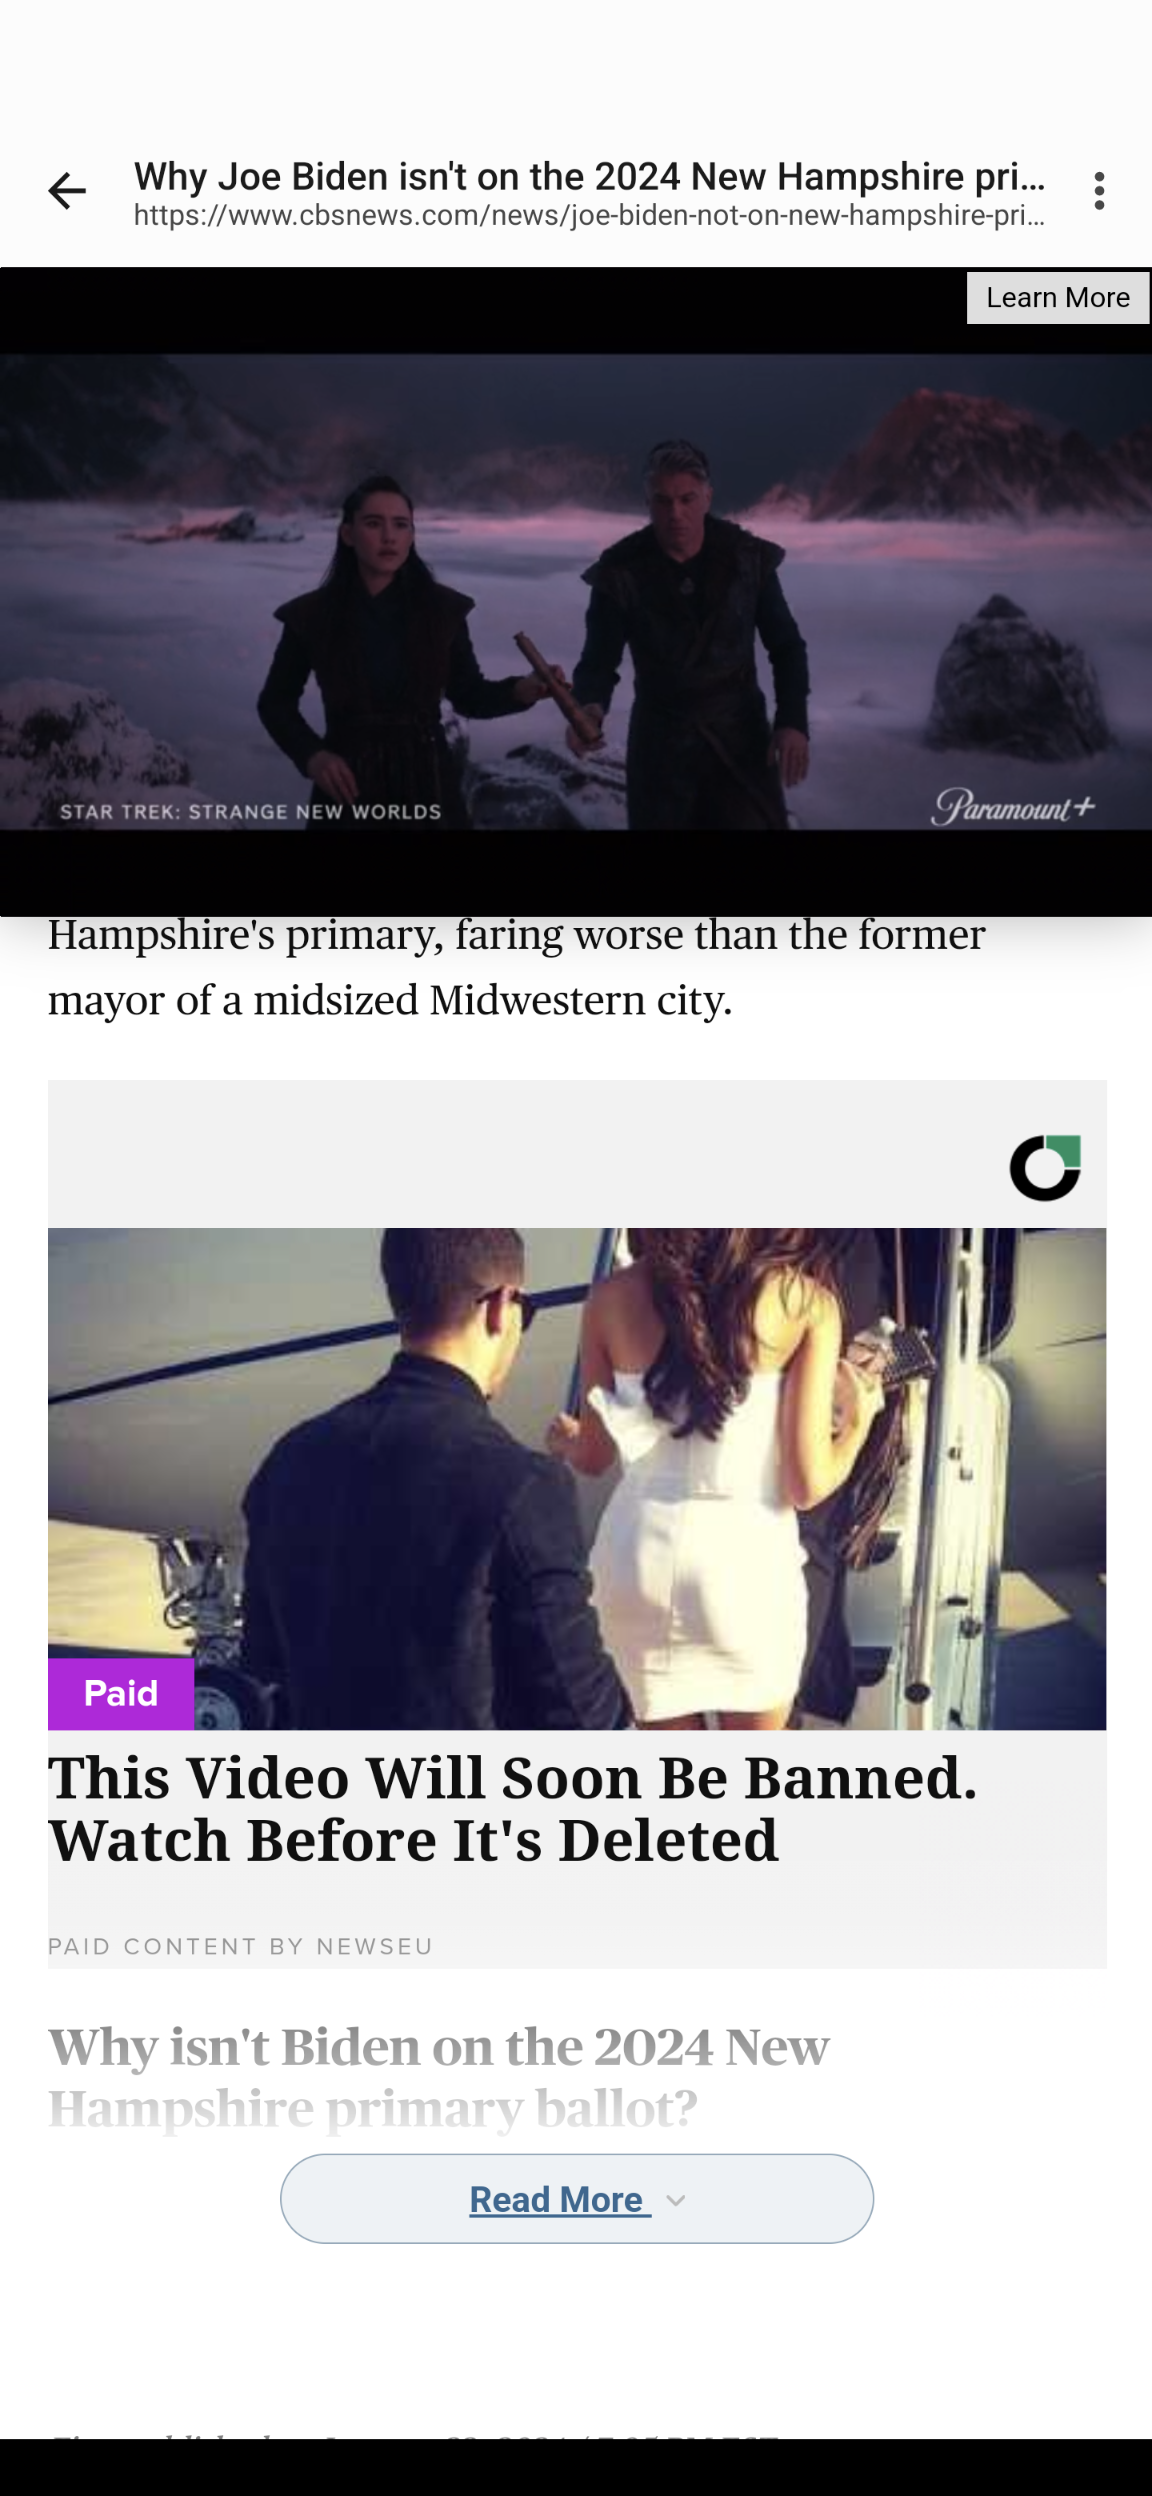 This is what that news site looks like without ad blocking on